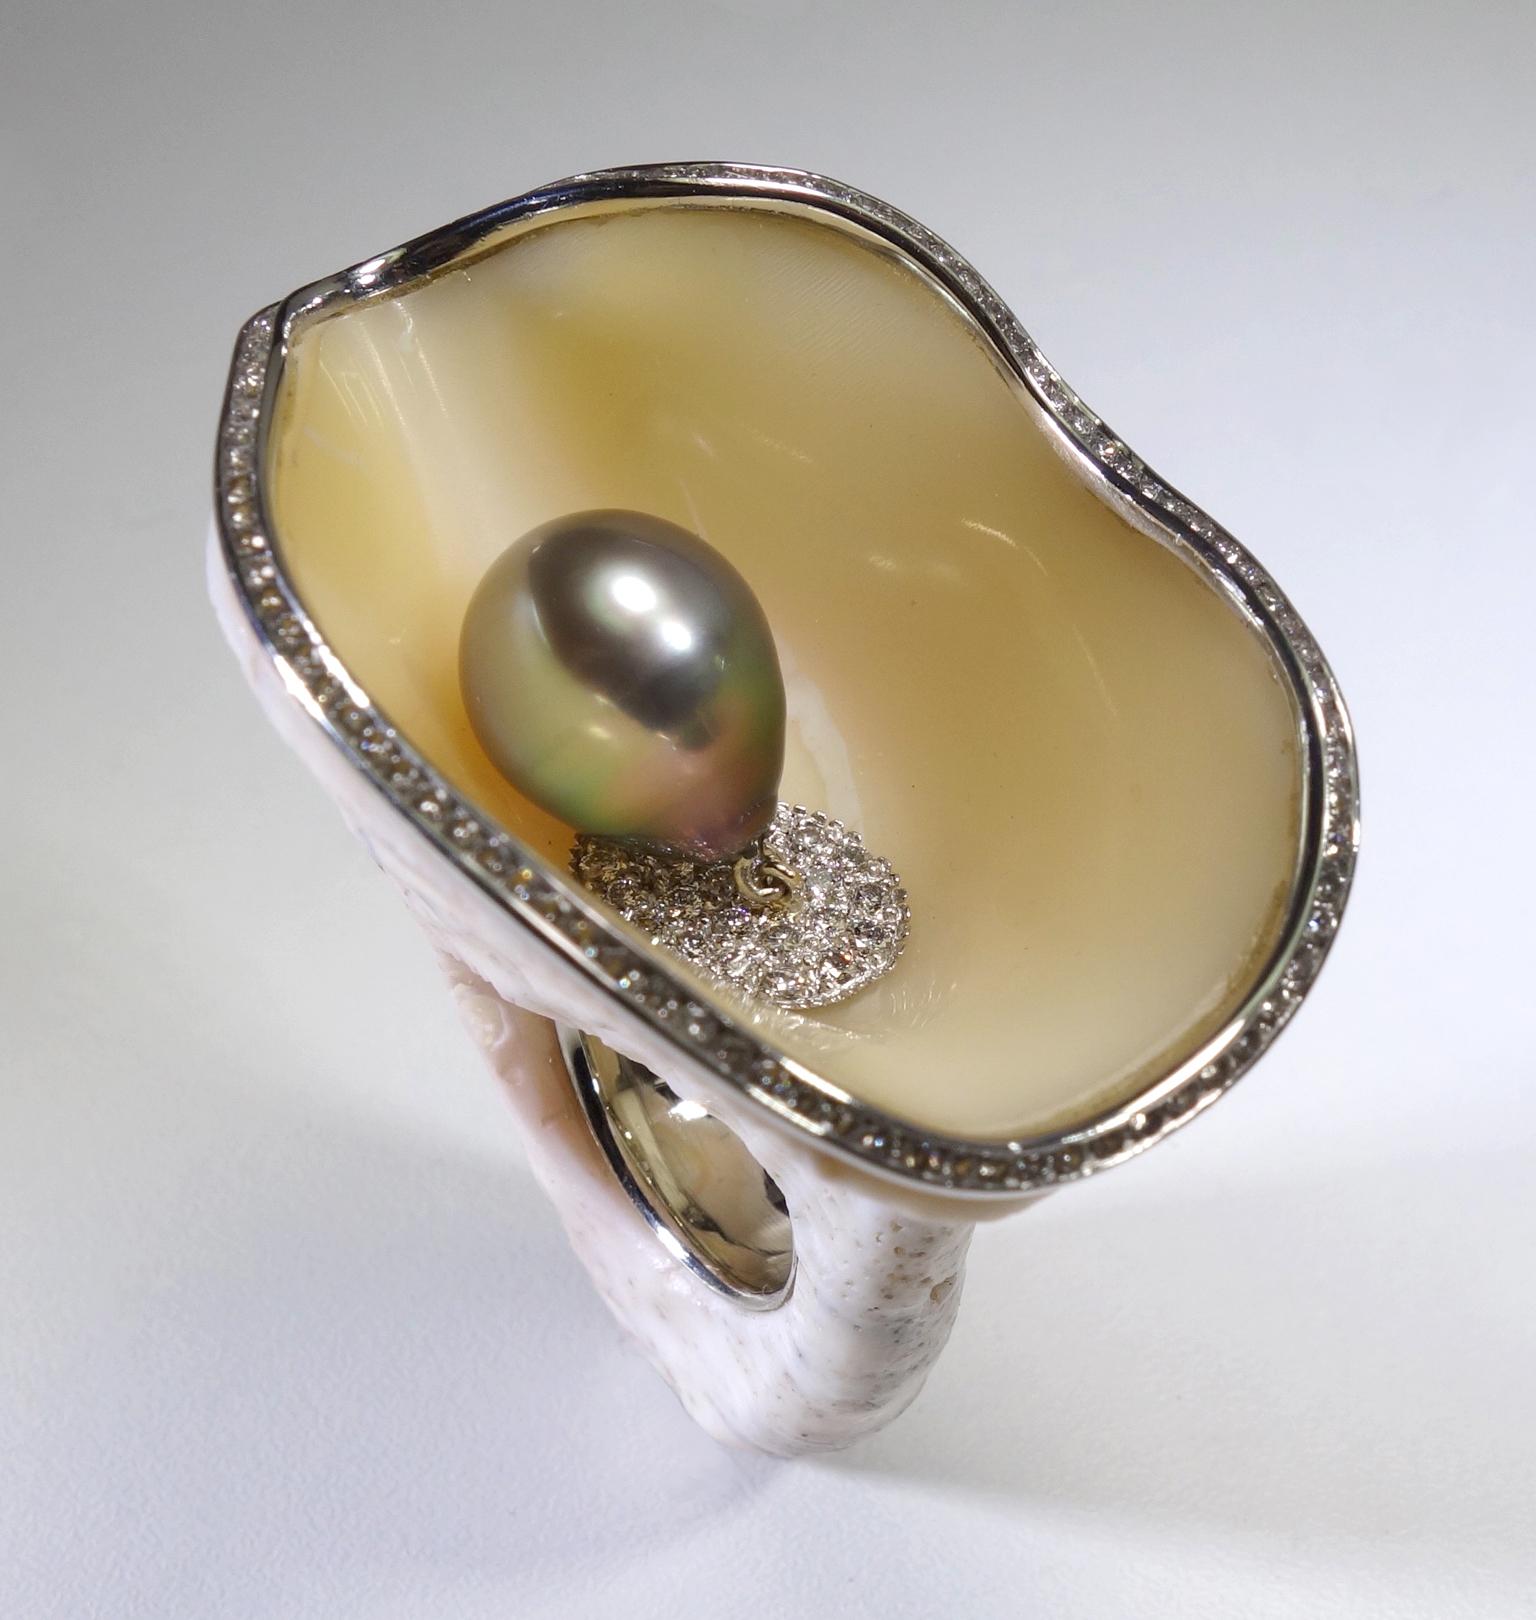 Objets d'Art wearable sculpture on your hand, an organically unique carved abalone shell ring featuring a tear drop shape in peacock color. Tahitian Pearl dangling from 18 Karat White Gold pave' diamond based in a total carat weight of 1.34 and